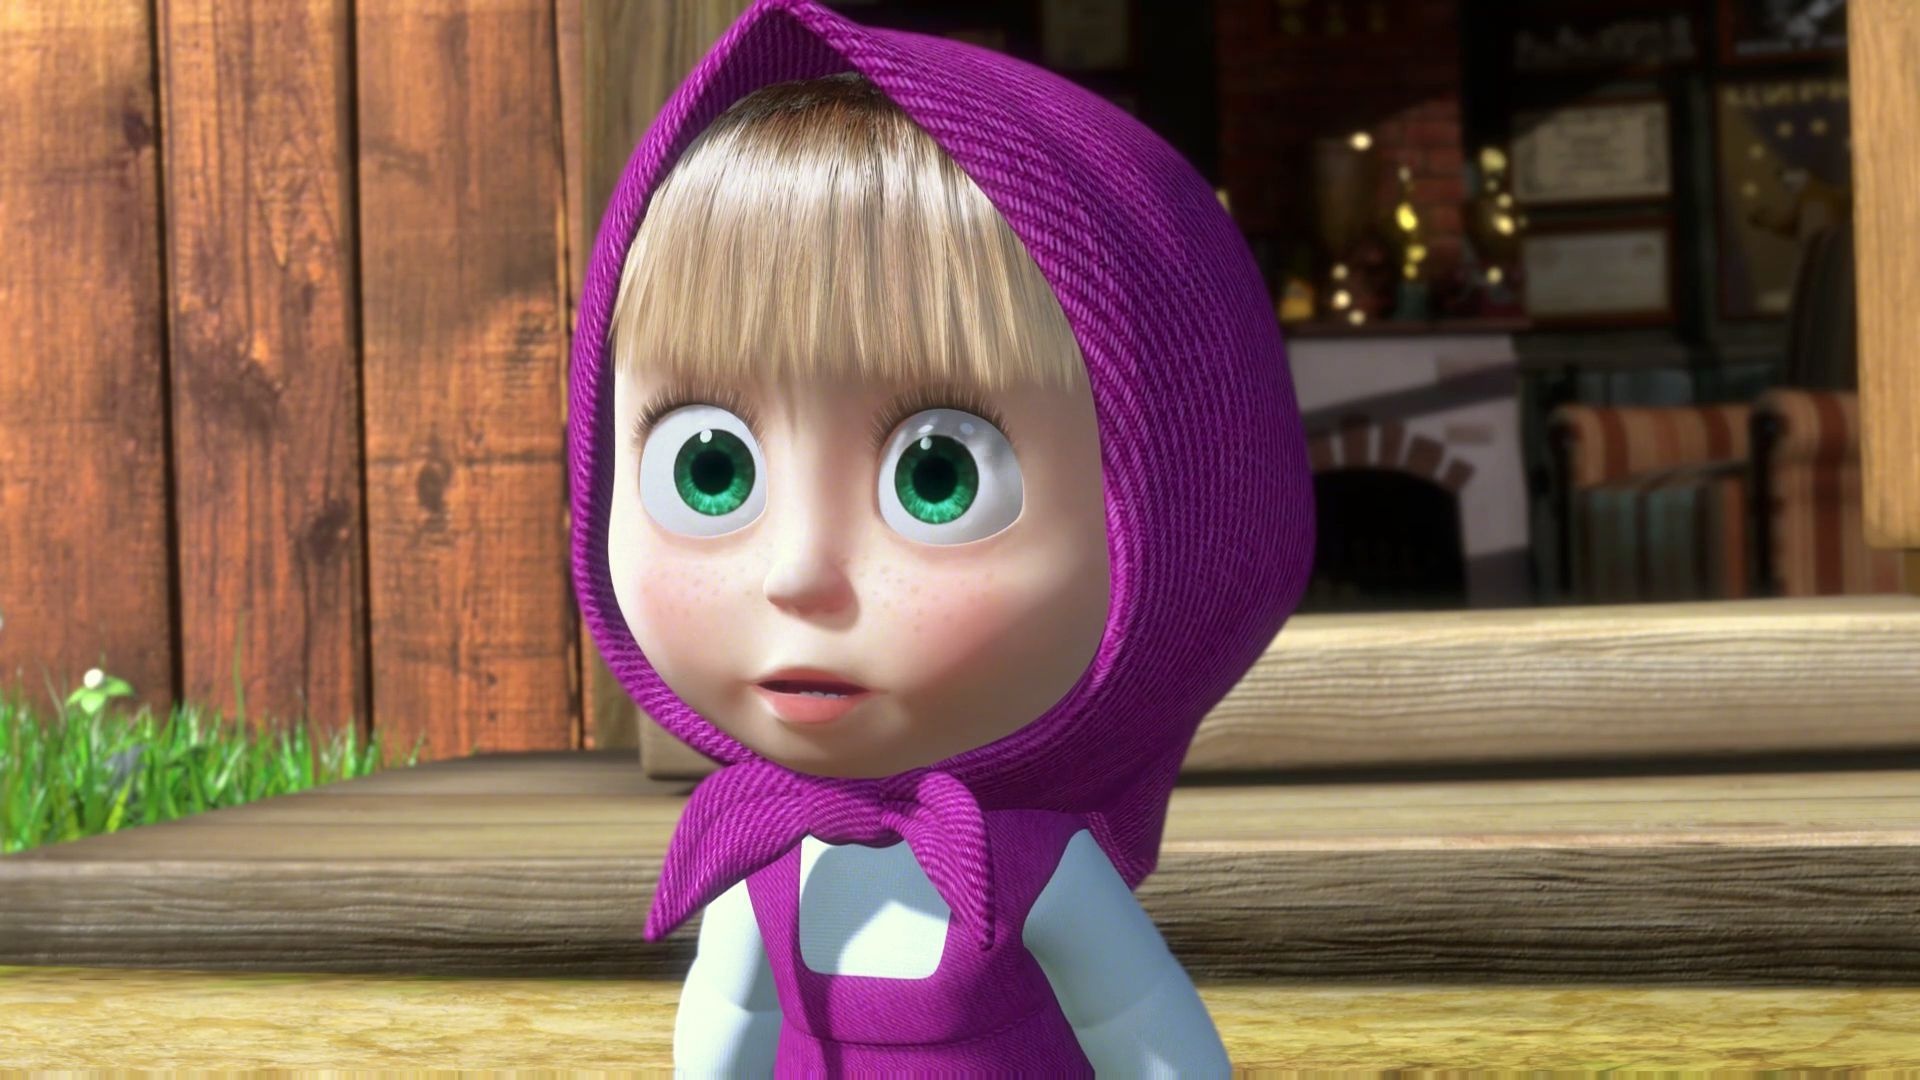 Masha and the Bear, Mobile wallpaper, Cartoon characters, Picture download, 1920x1080 Full HD Desktop